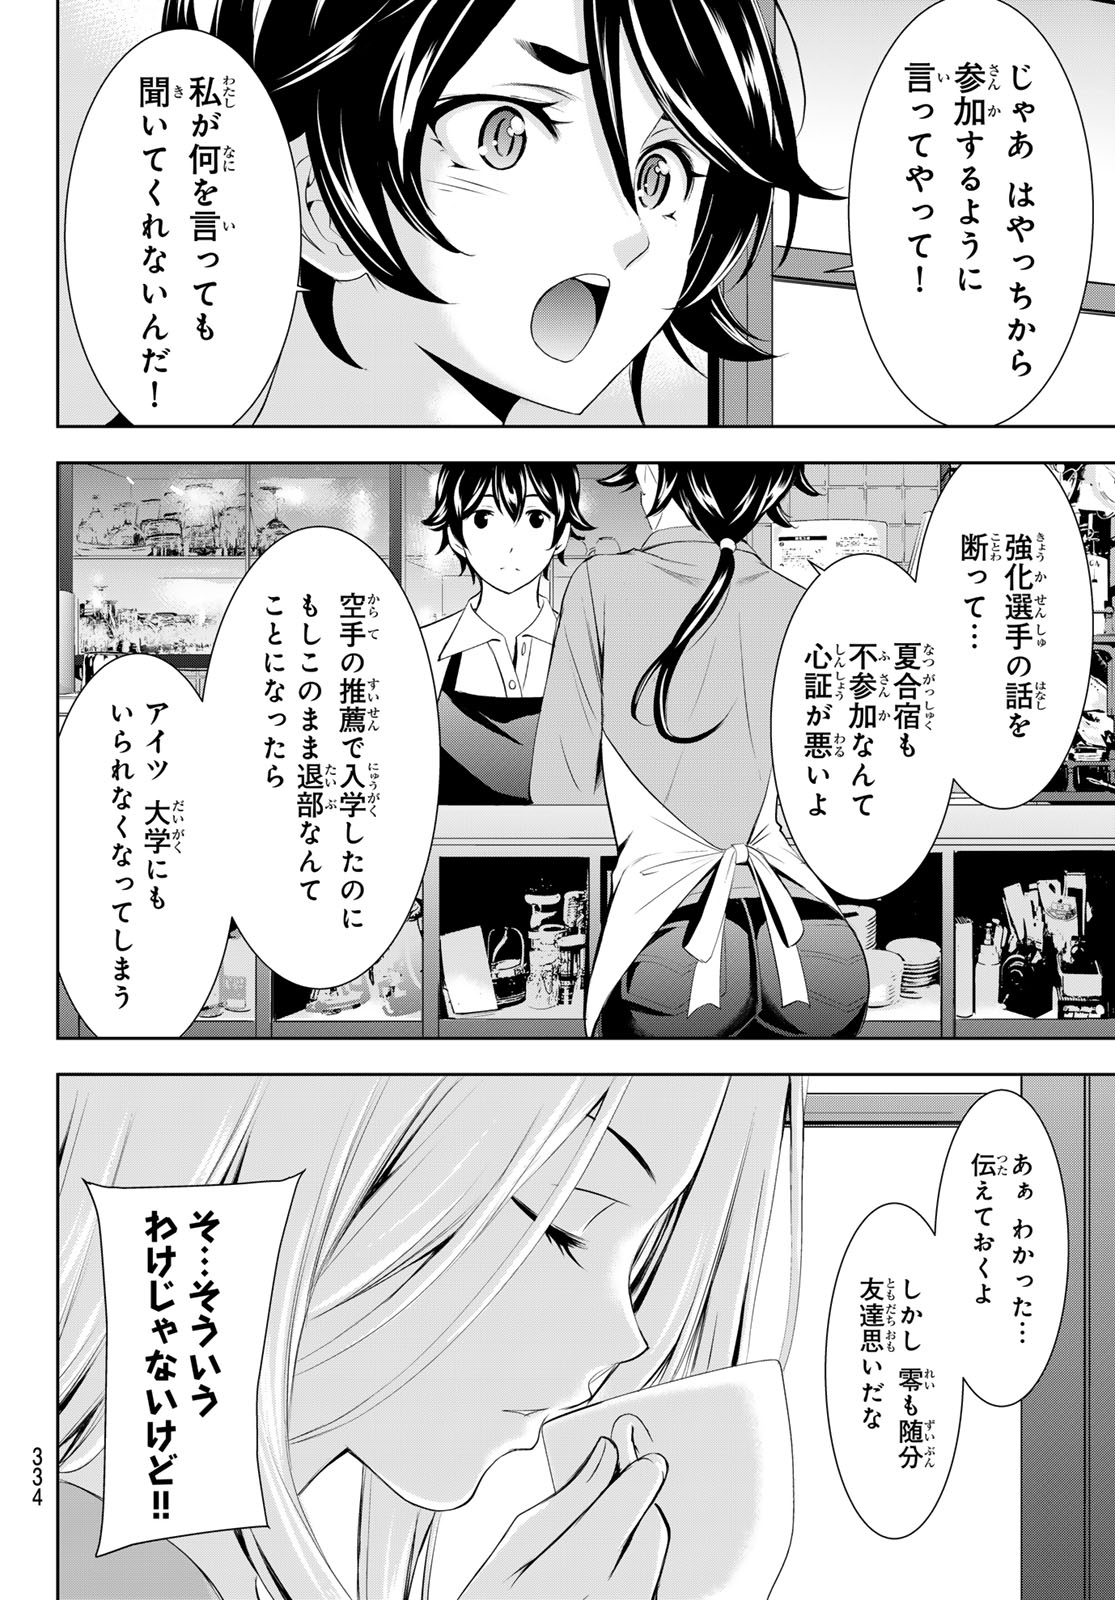 Megami no Cafe Terace - Chapter 152 - Page 12